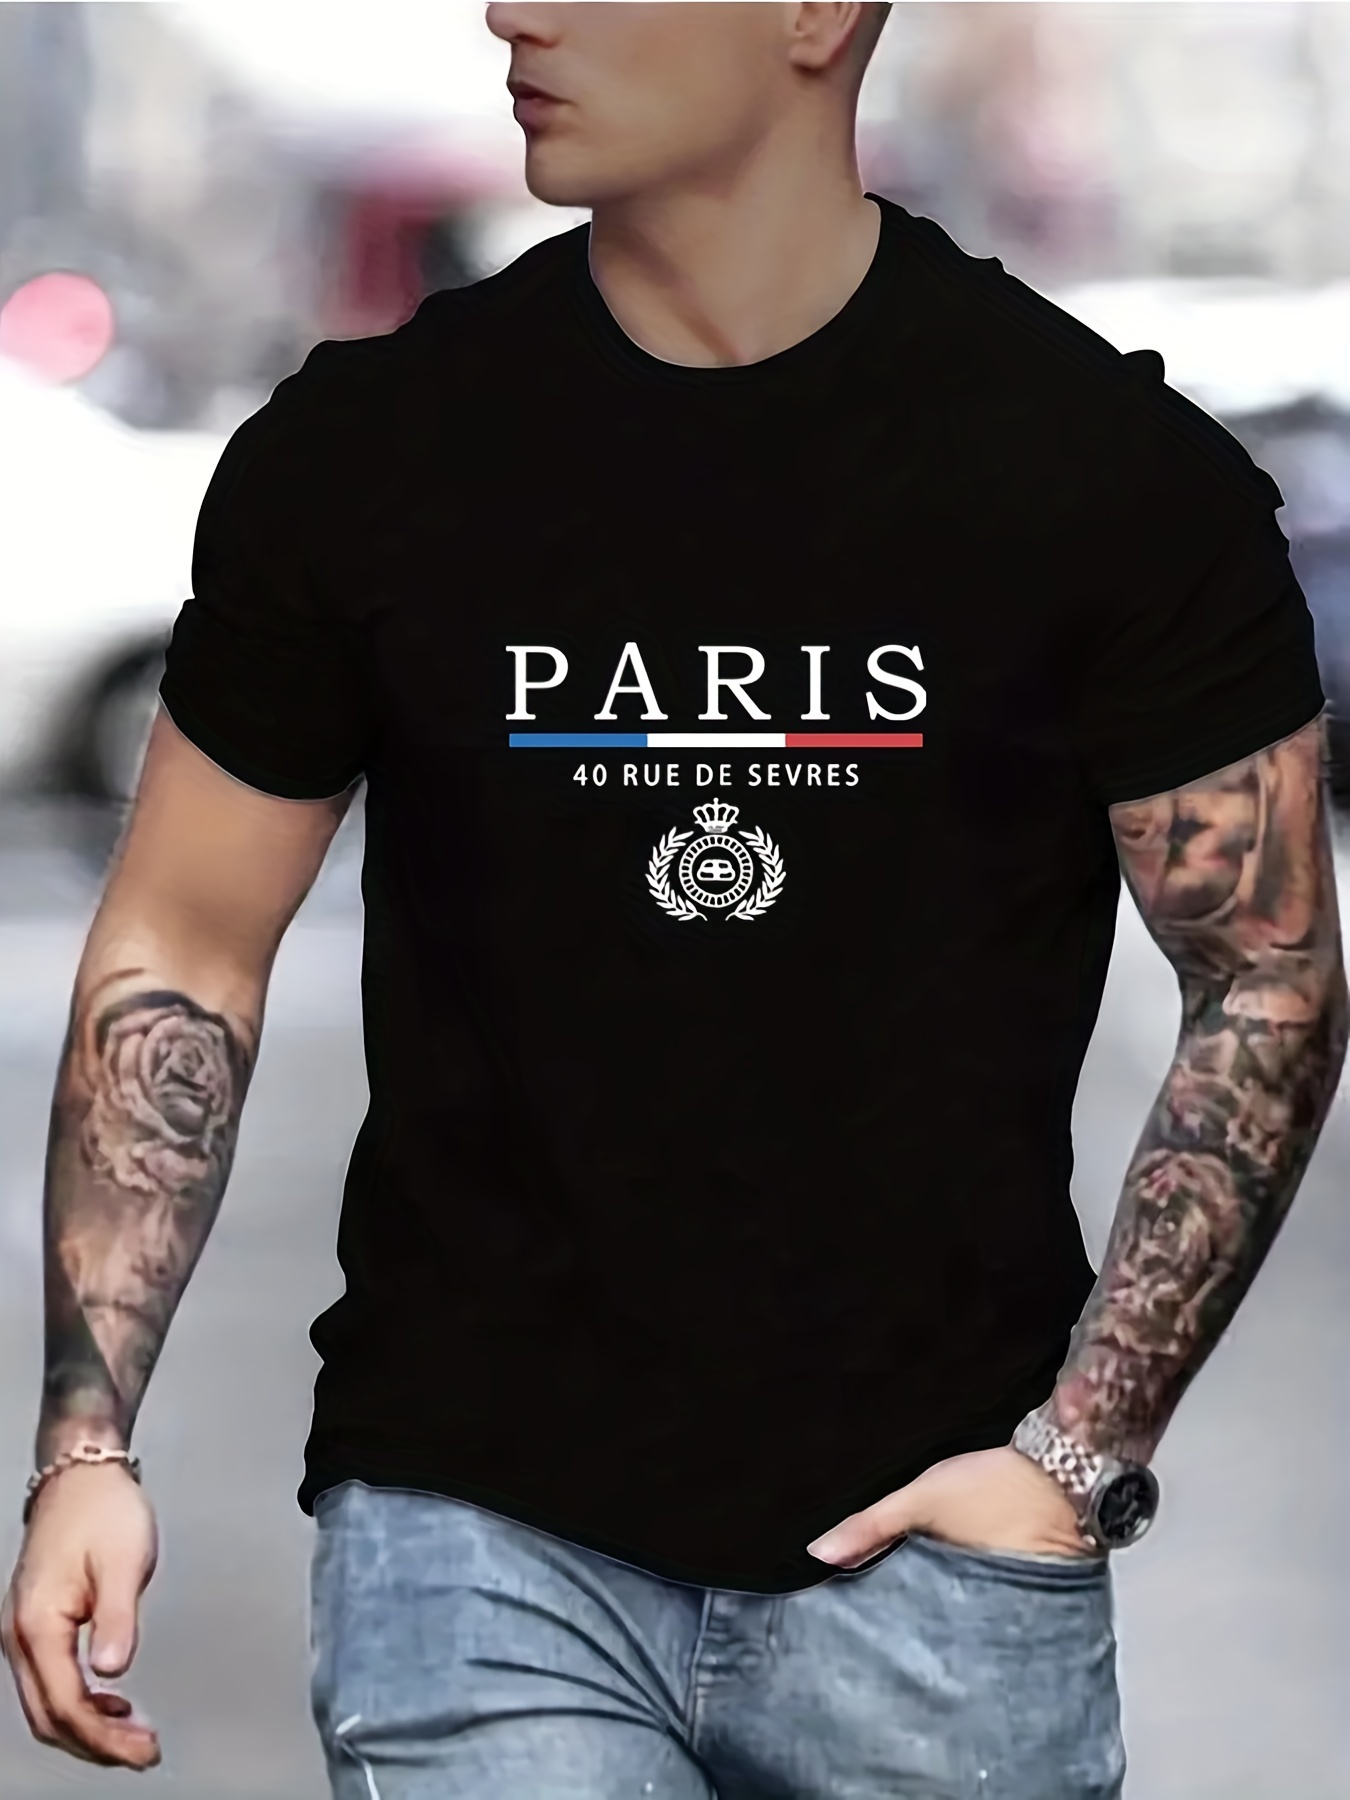 paris print t shirt tees for men casual short sleeve tshirt for summer spring fall tops as gifts details 1